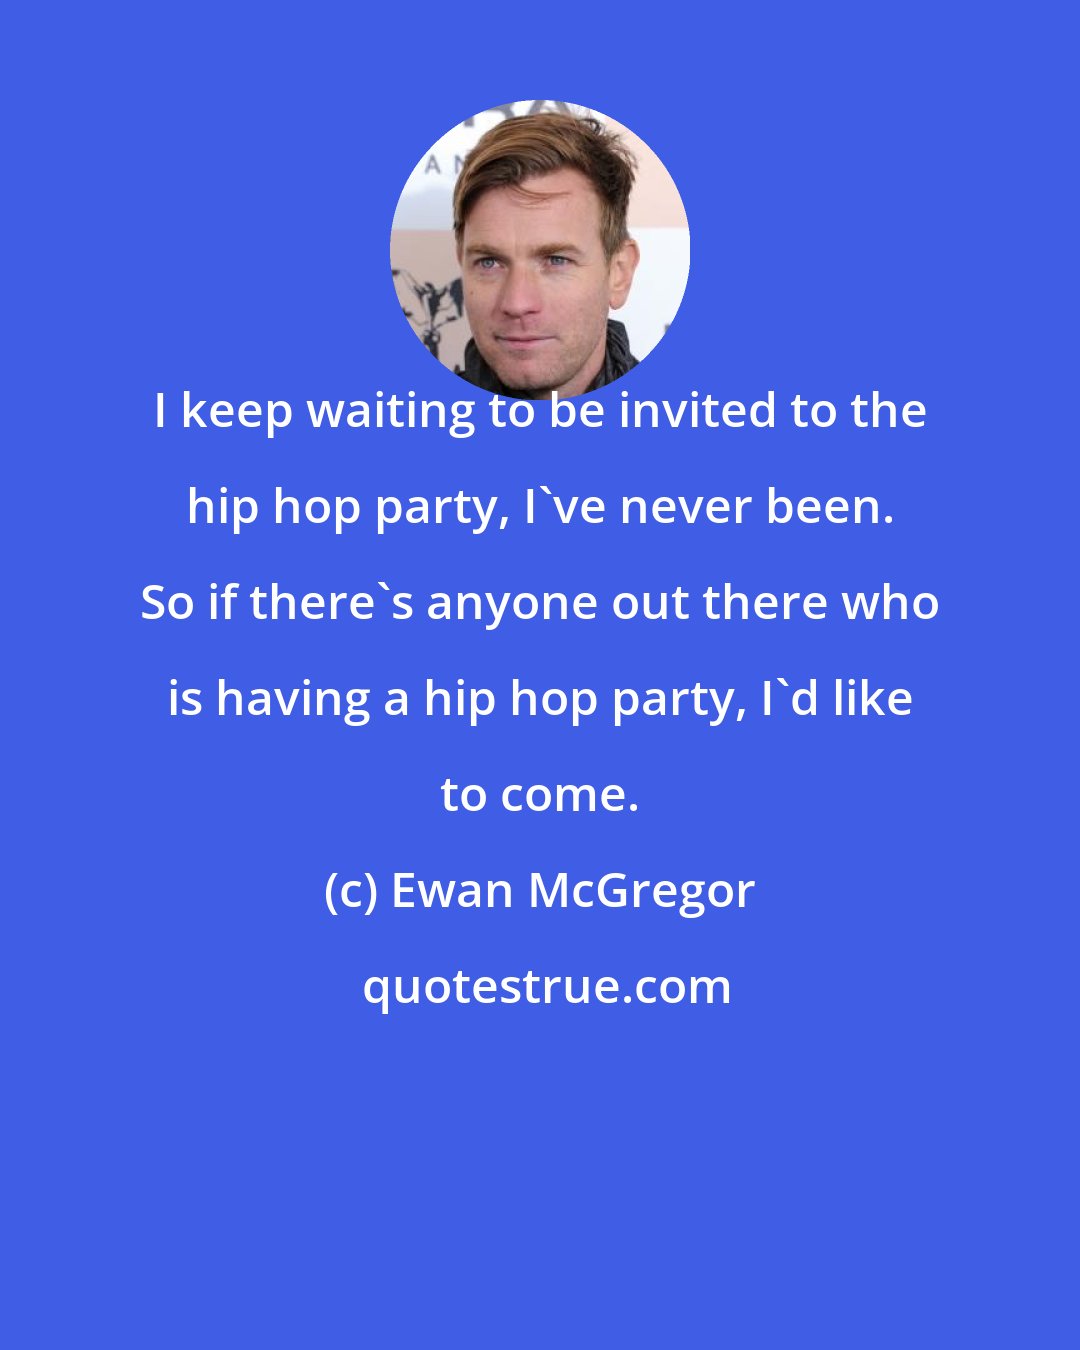 Ewan McGregor: I keep waiting to be invited to the hip hop party, I've never been. So if there's anyone out there who is having a hip hop party, I'd like to come.